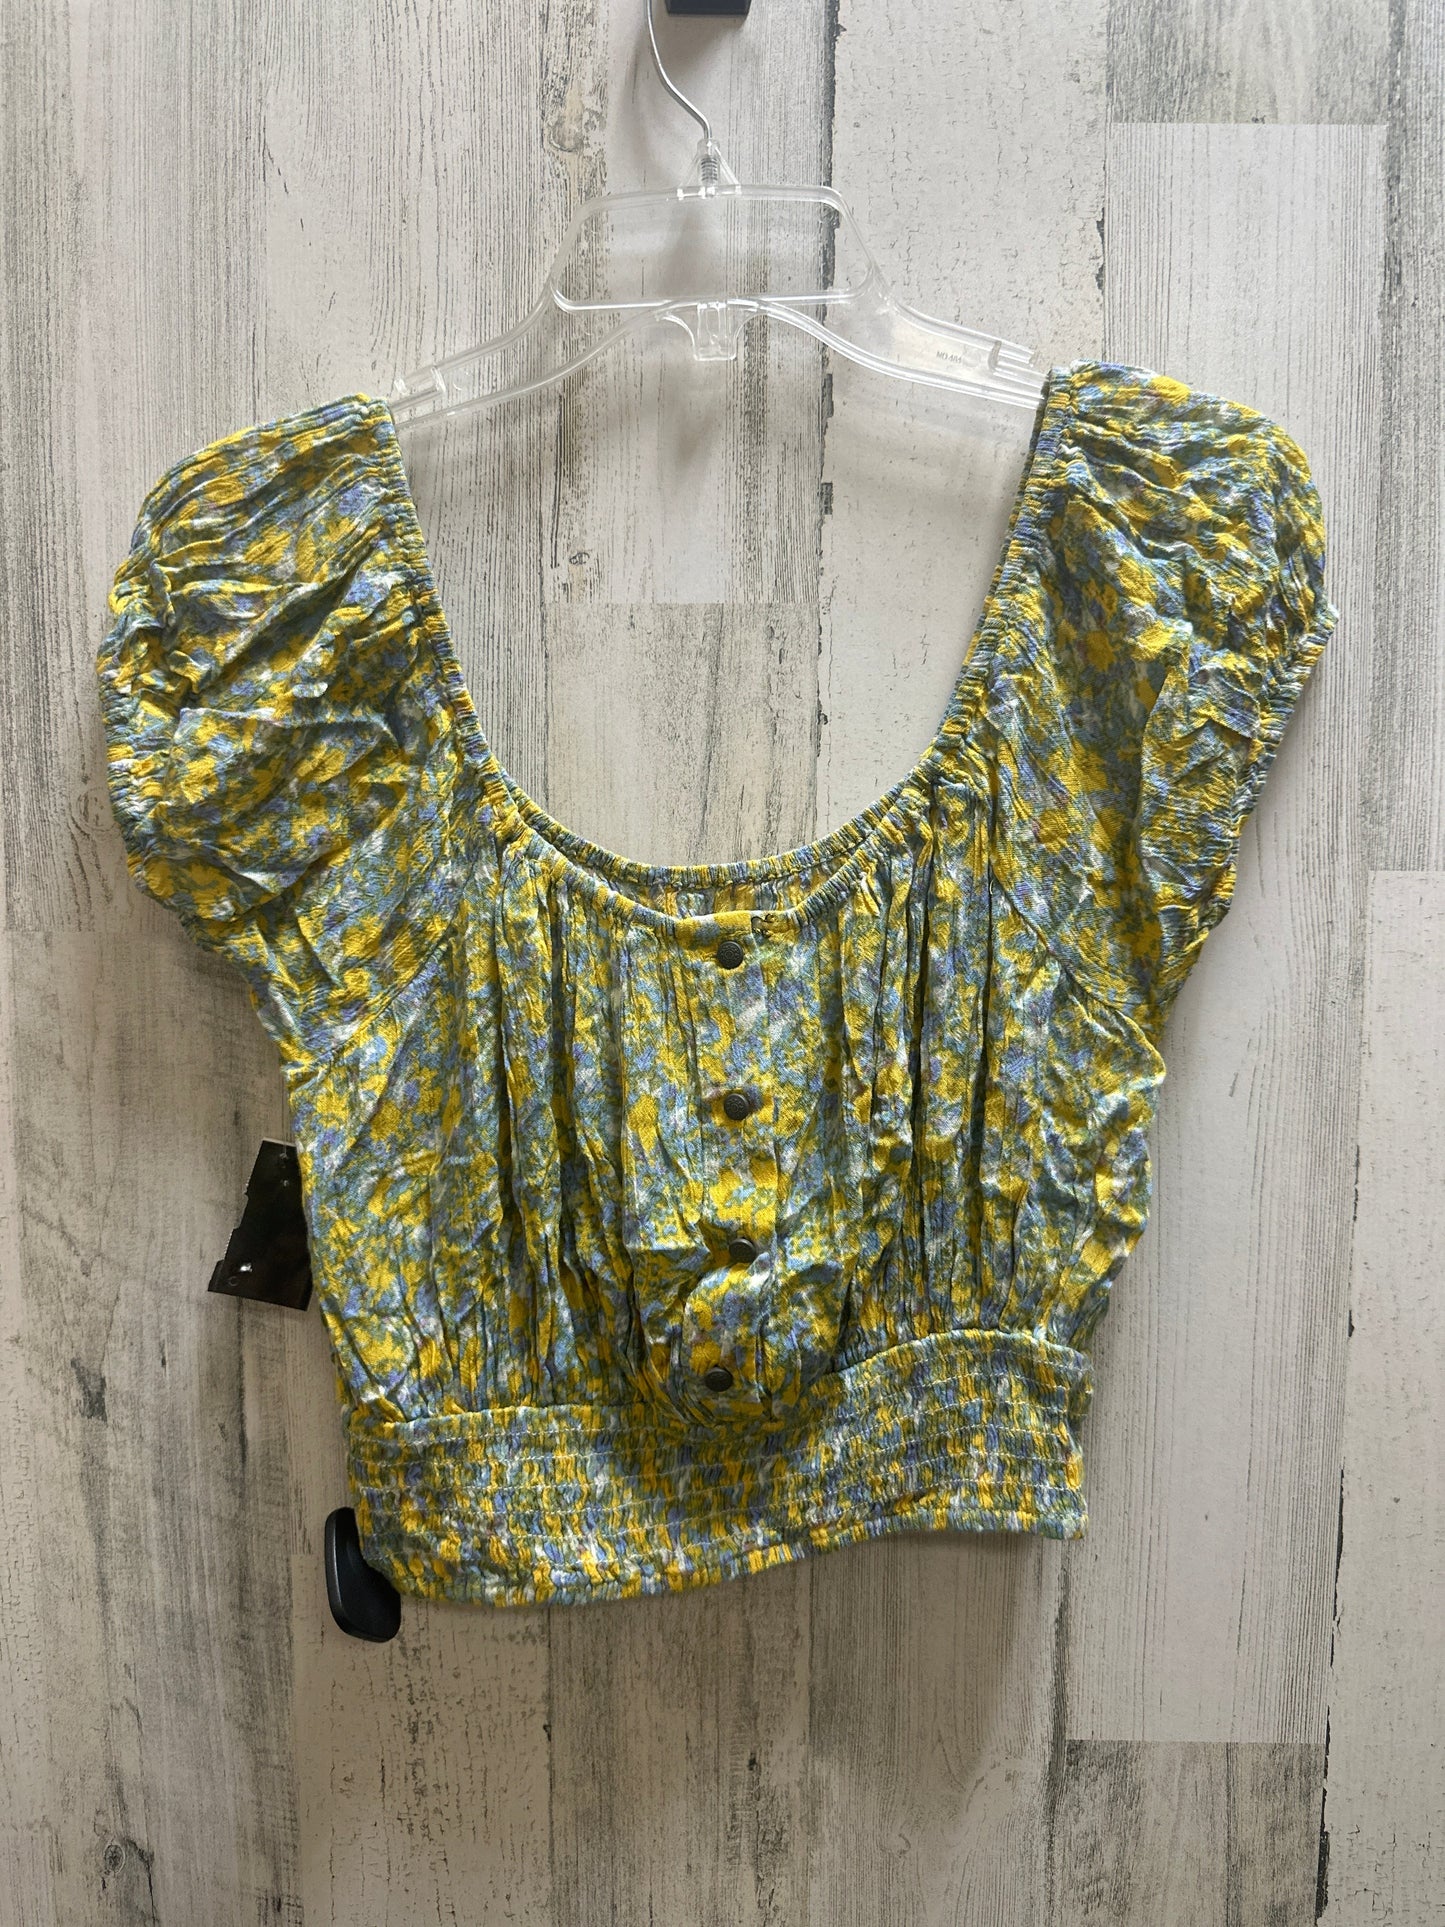 Yellow Top Short Sleeve Free People, Size Xs